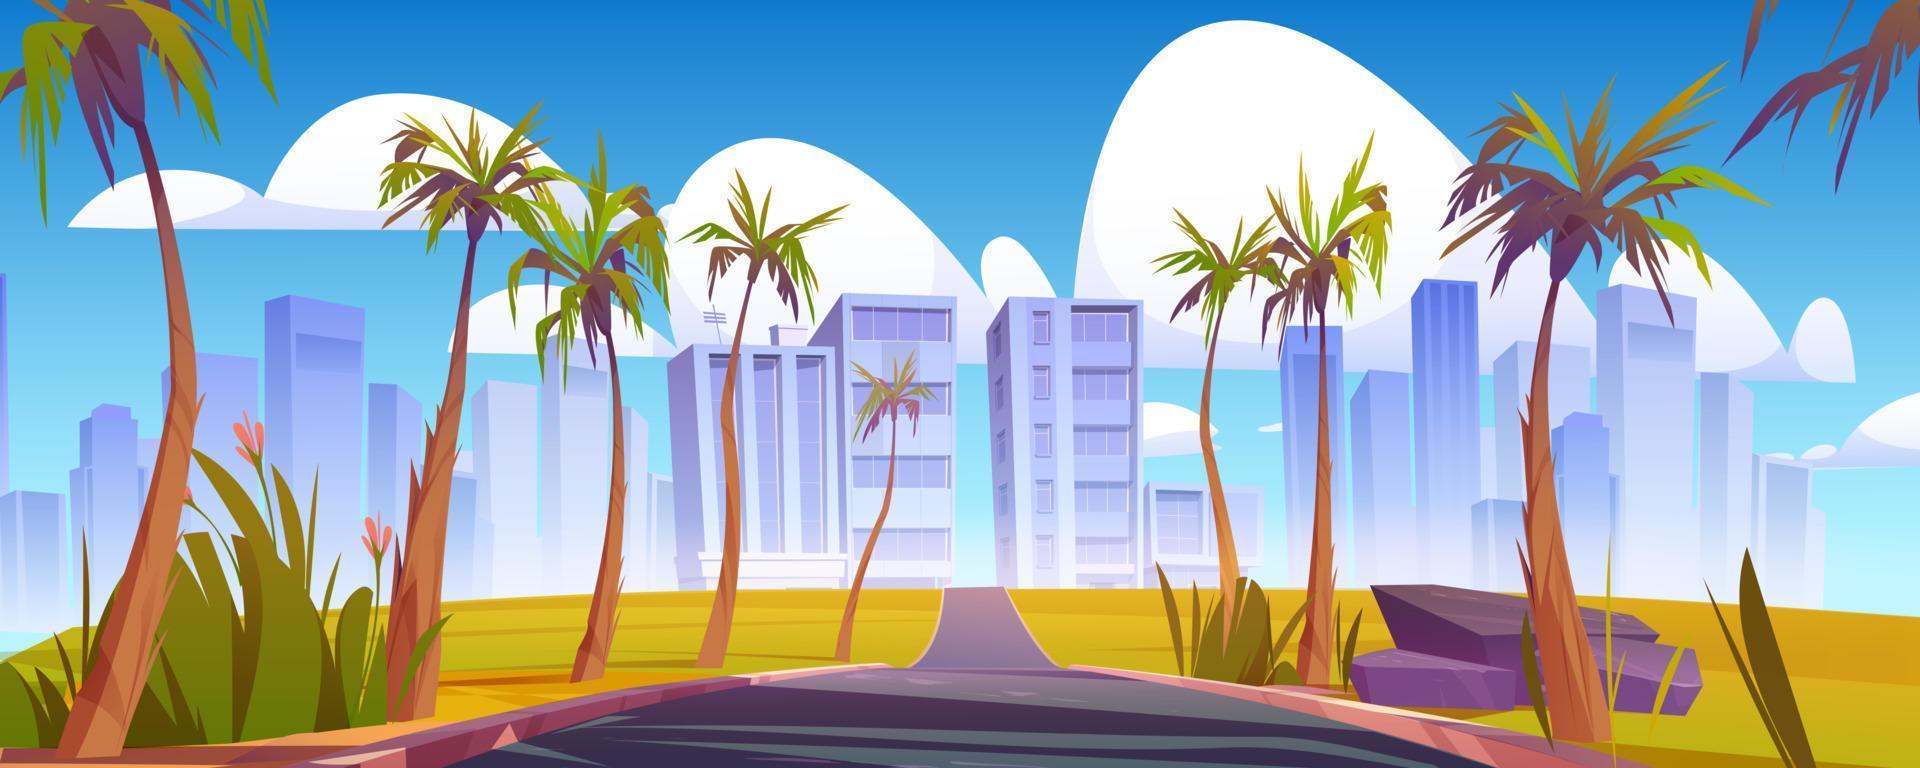 Car road to city with palm trees vector